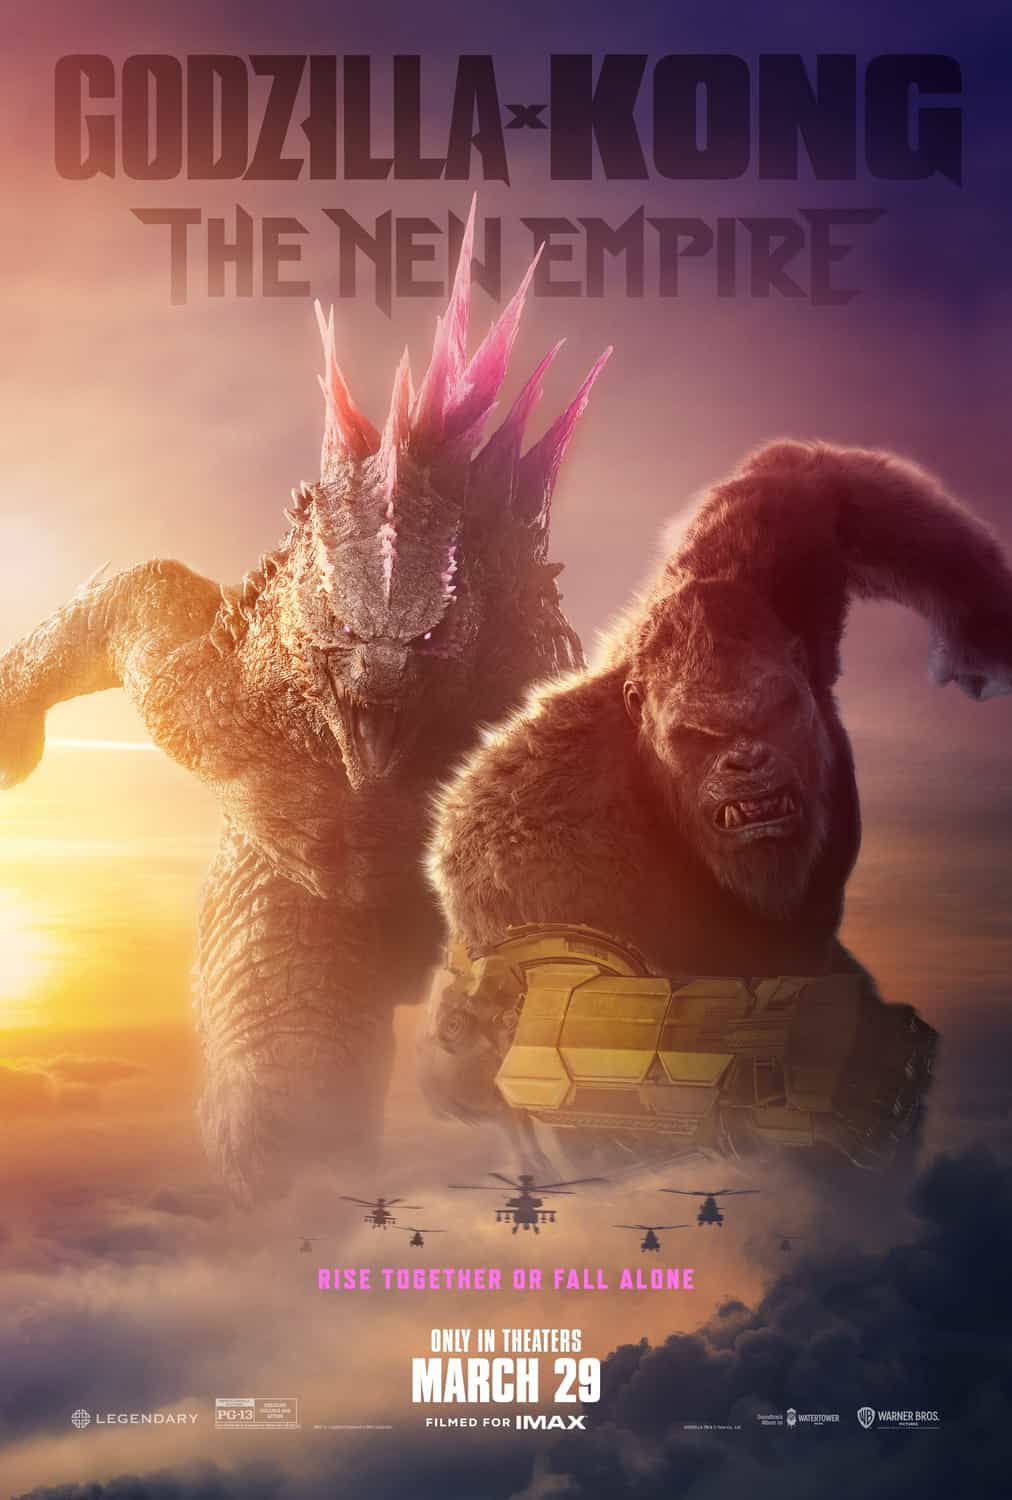 Global Box Office Weekend Report 5th - 7th April 2024:  Godzilla X Kong: The New Empire remains at the top of the global box office with The First Omen the top new movie at 5